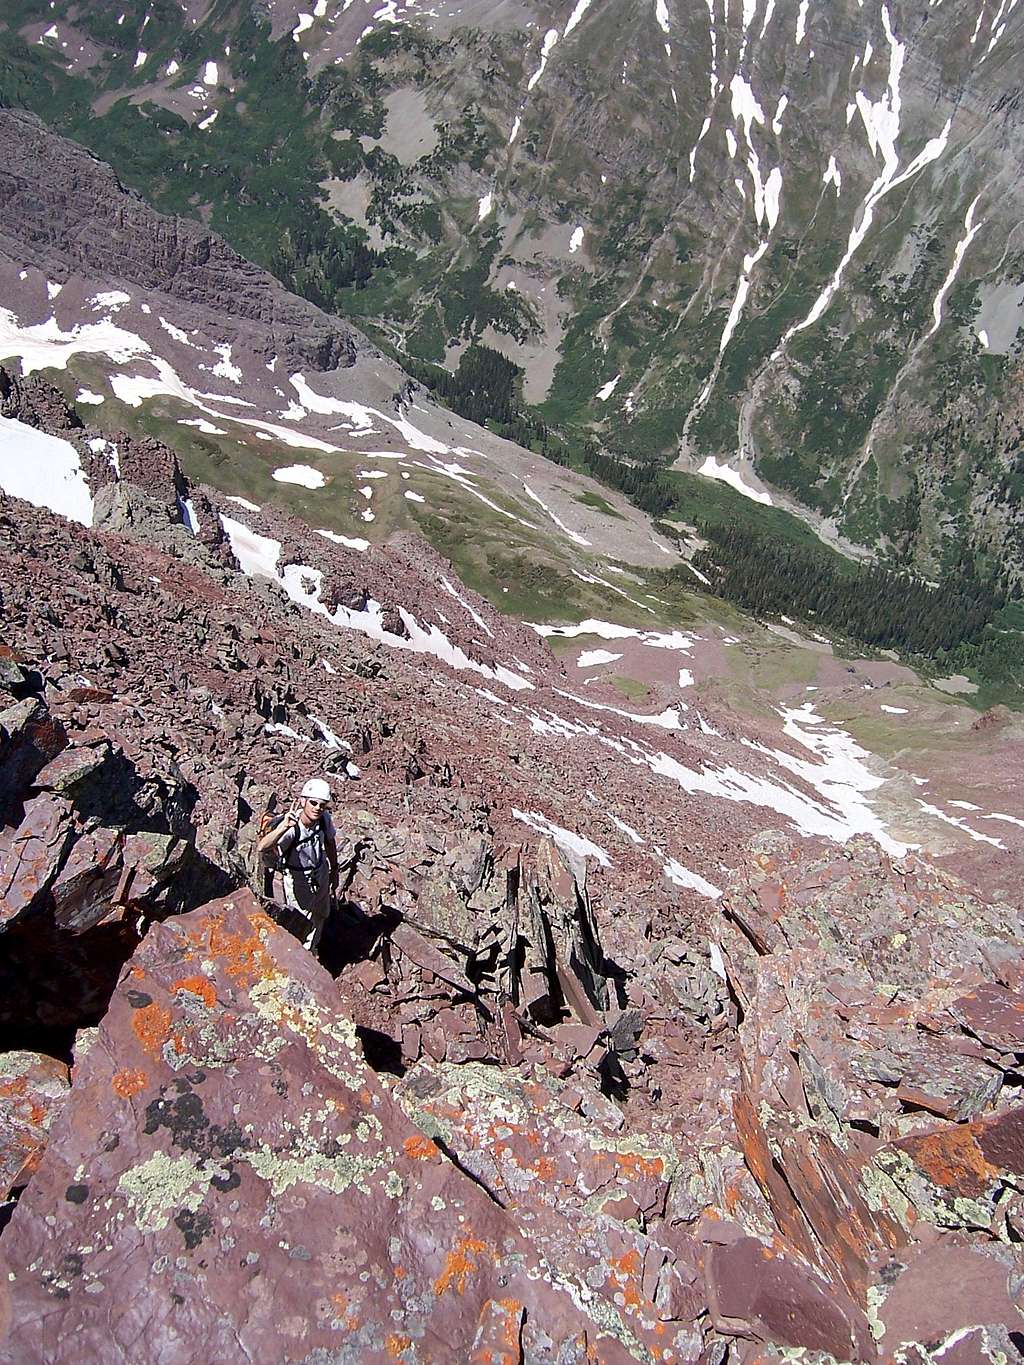 Looking down the West Face